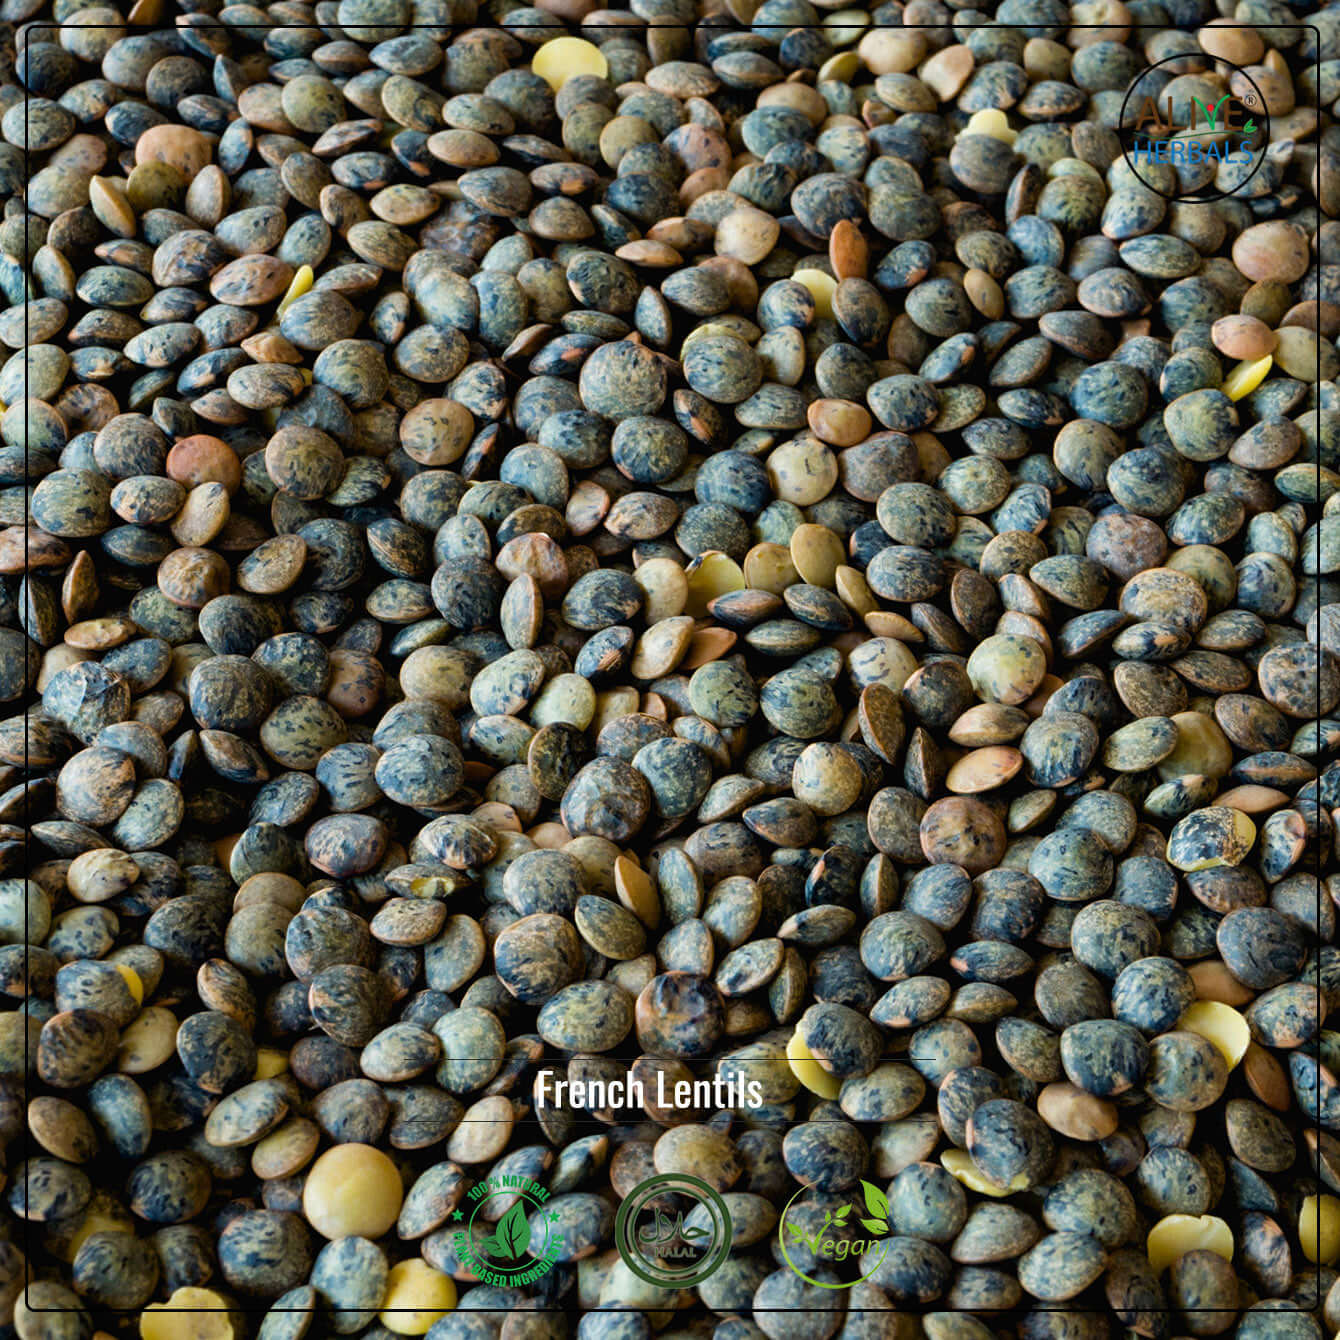 French Lentils - Shop at Natural Food Store | Alive Herbals.